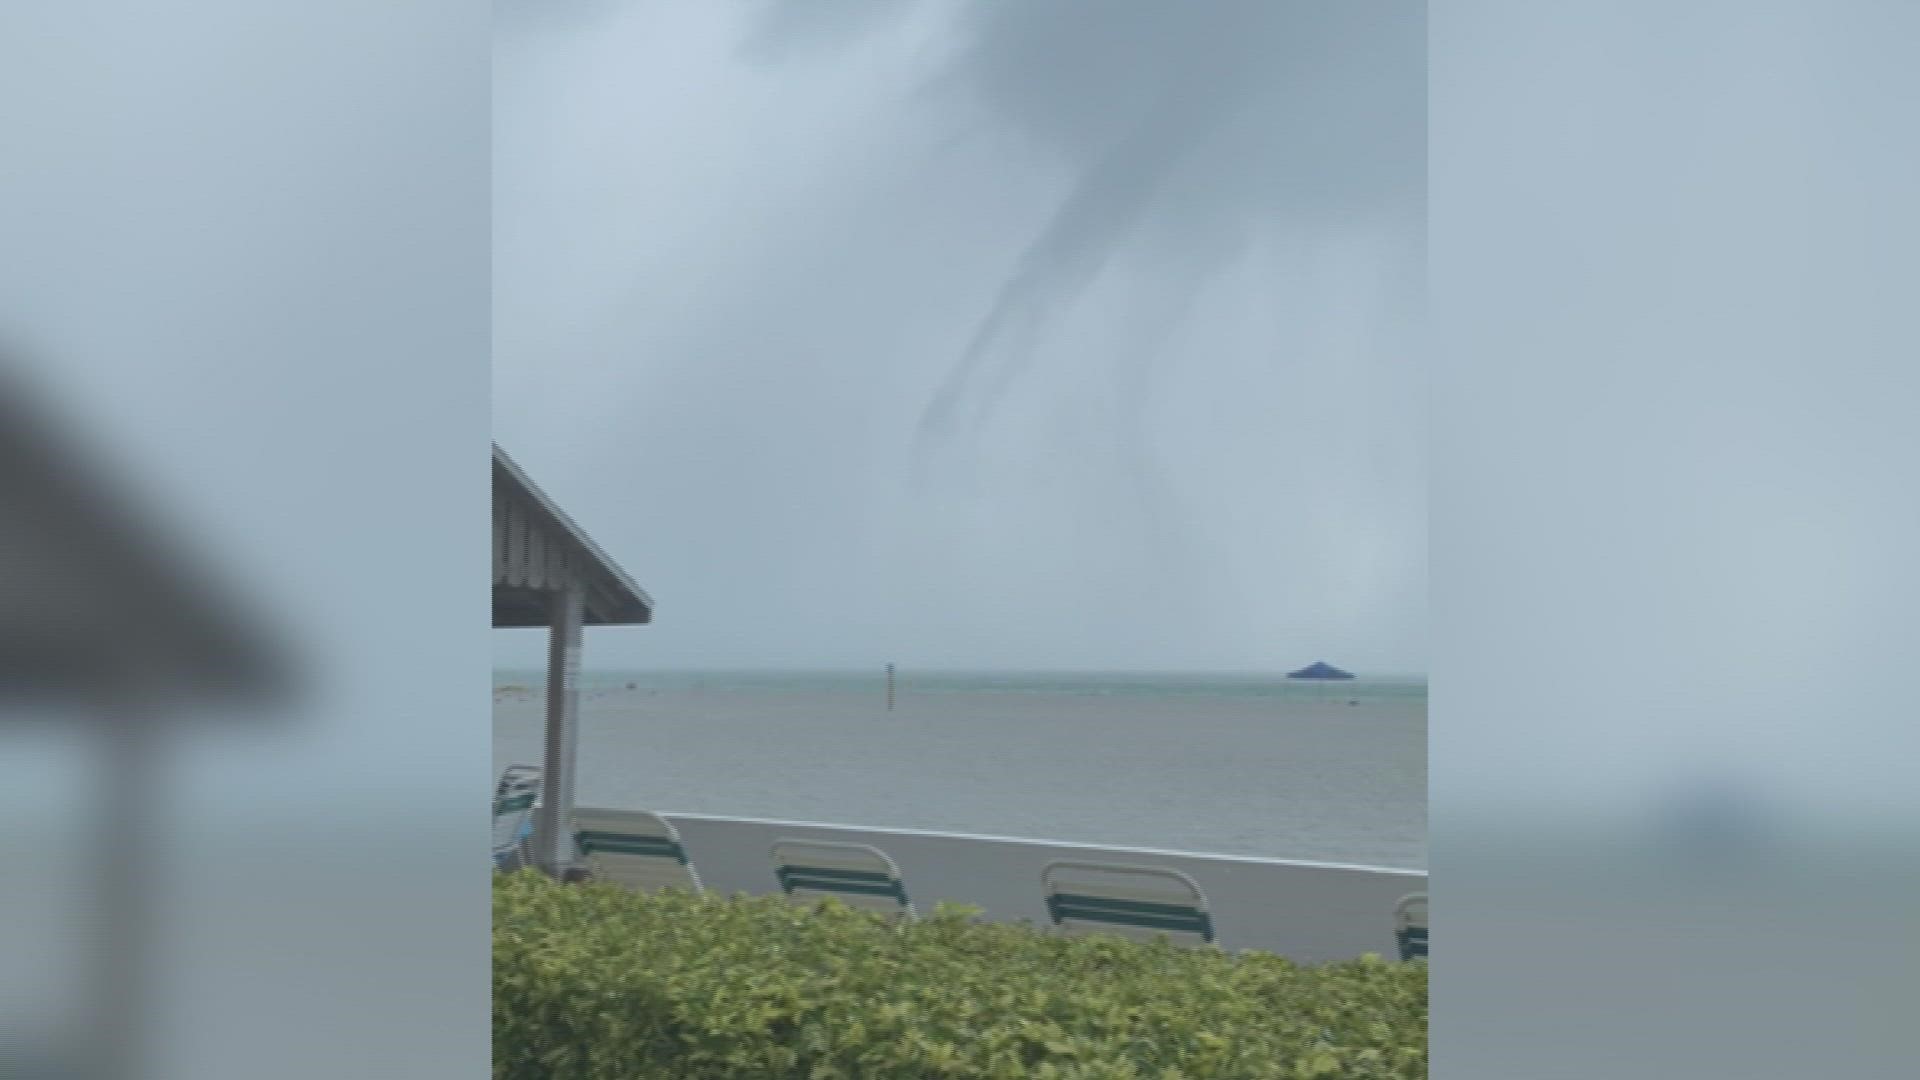 10 Tampa Bay anchor Carolina Leid came close to the funnel around 5 p.m. at the coast in St. Pete Beach.